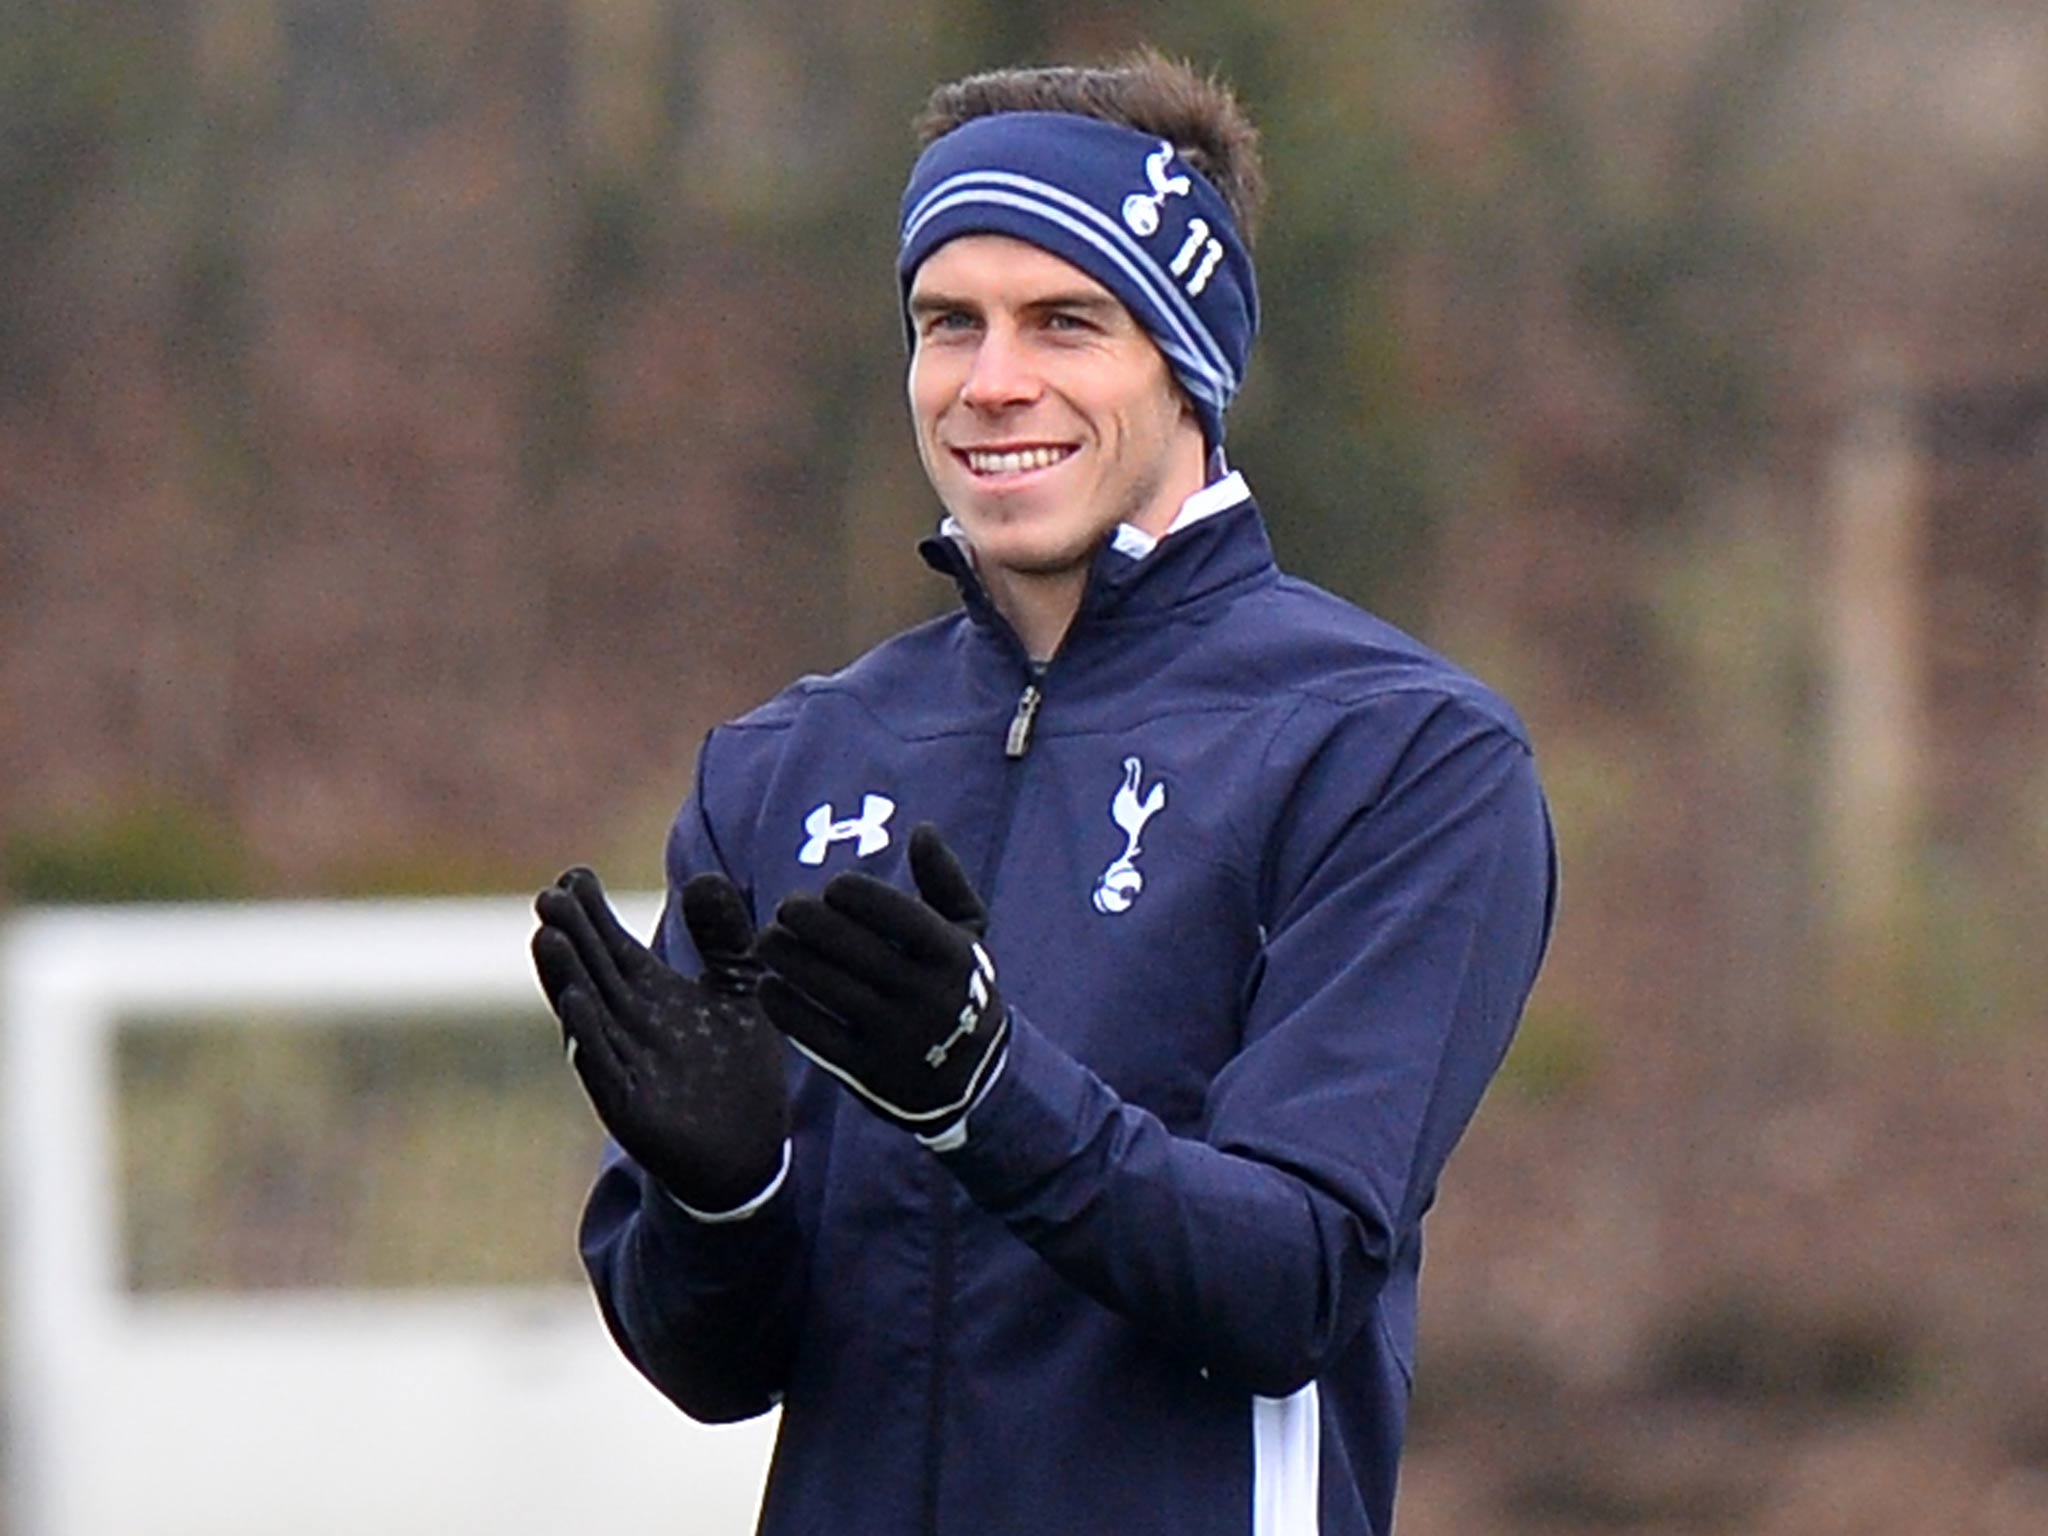 Gareth Bale in training with Spurs